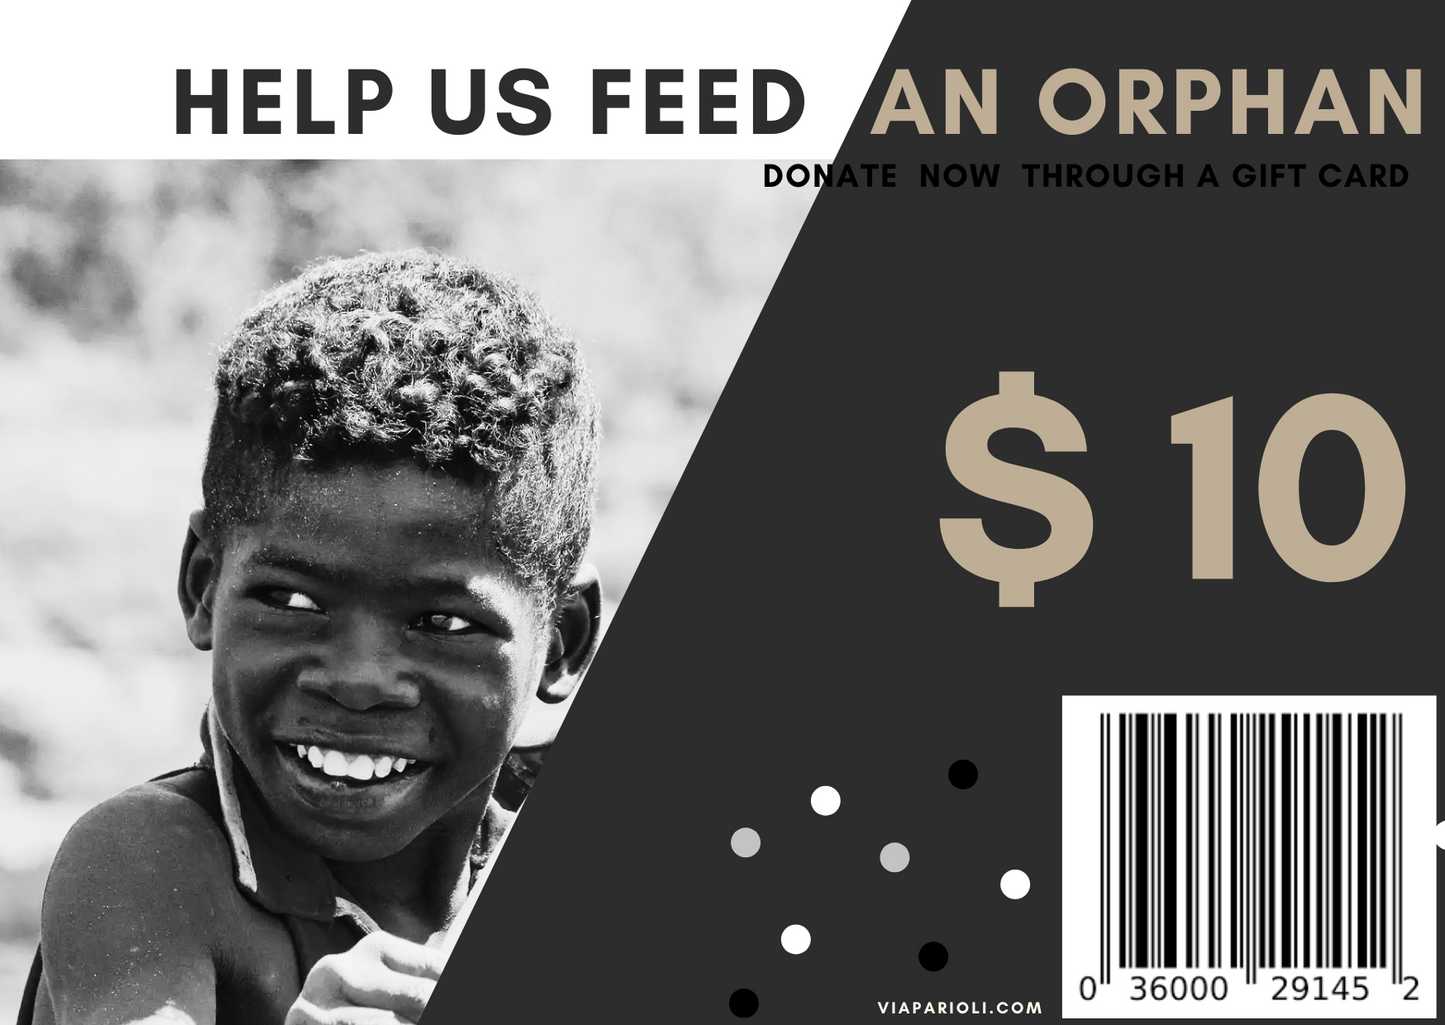 PARIOLI GIFTS - BUY A GIFT CARD AND FEED A CHILD IN MADAGASCAR.